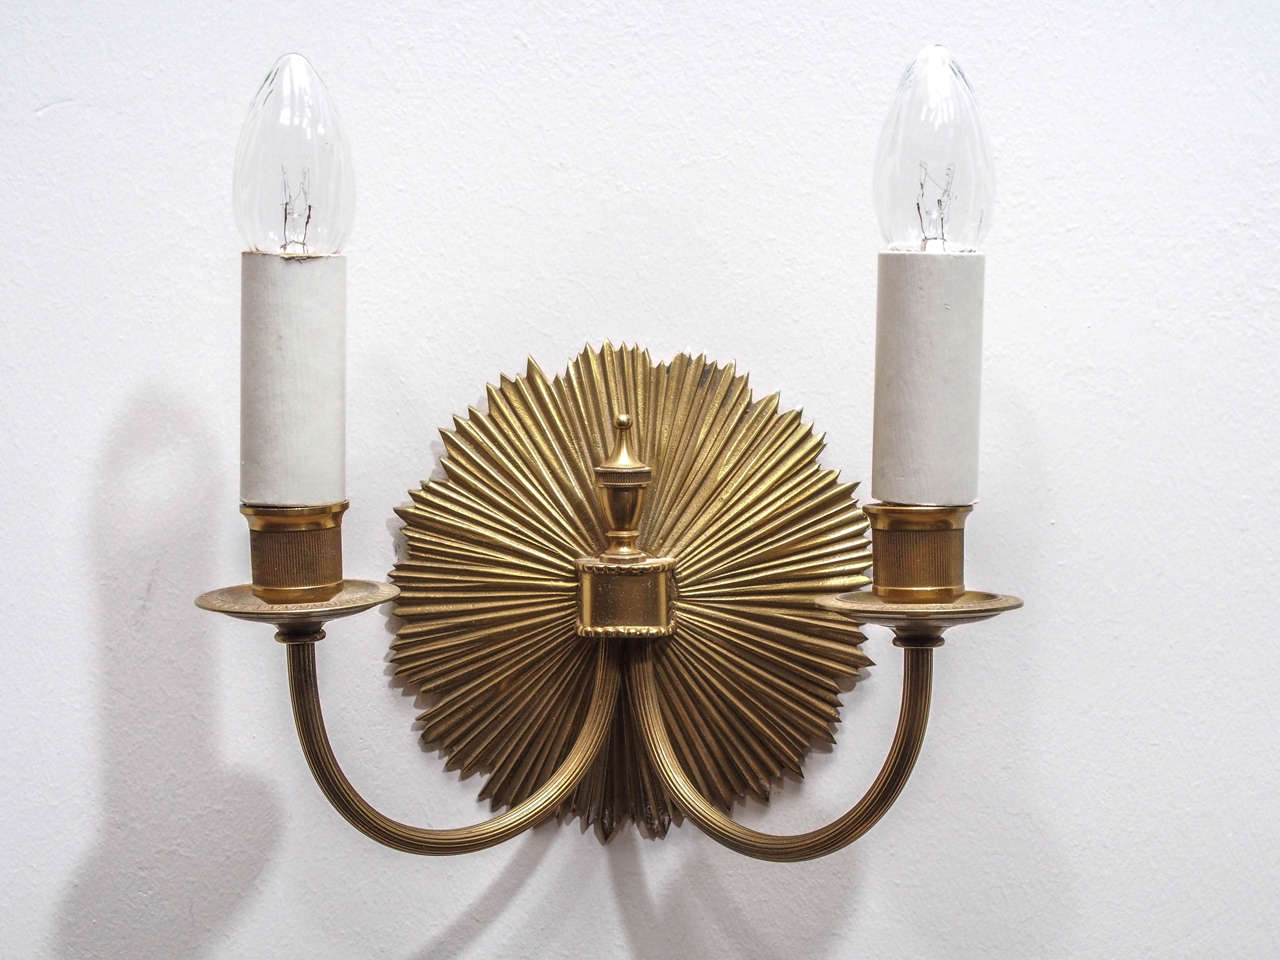 Pair of two-light gilt bronze sconces with "sunburst" backplate and urn finial at the center; height measurement below to top of socket.